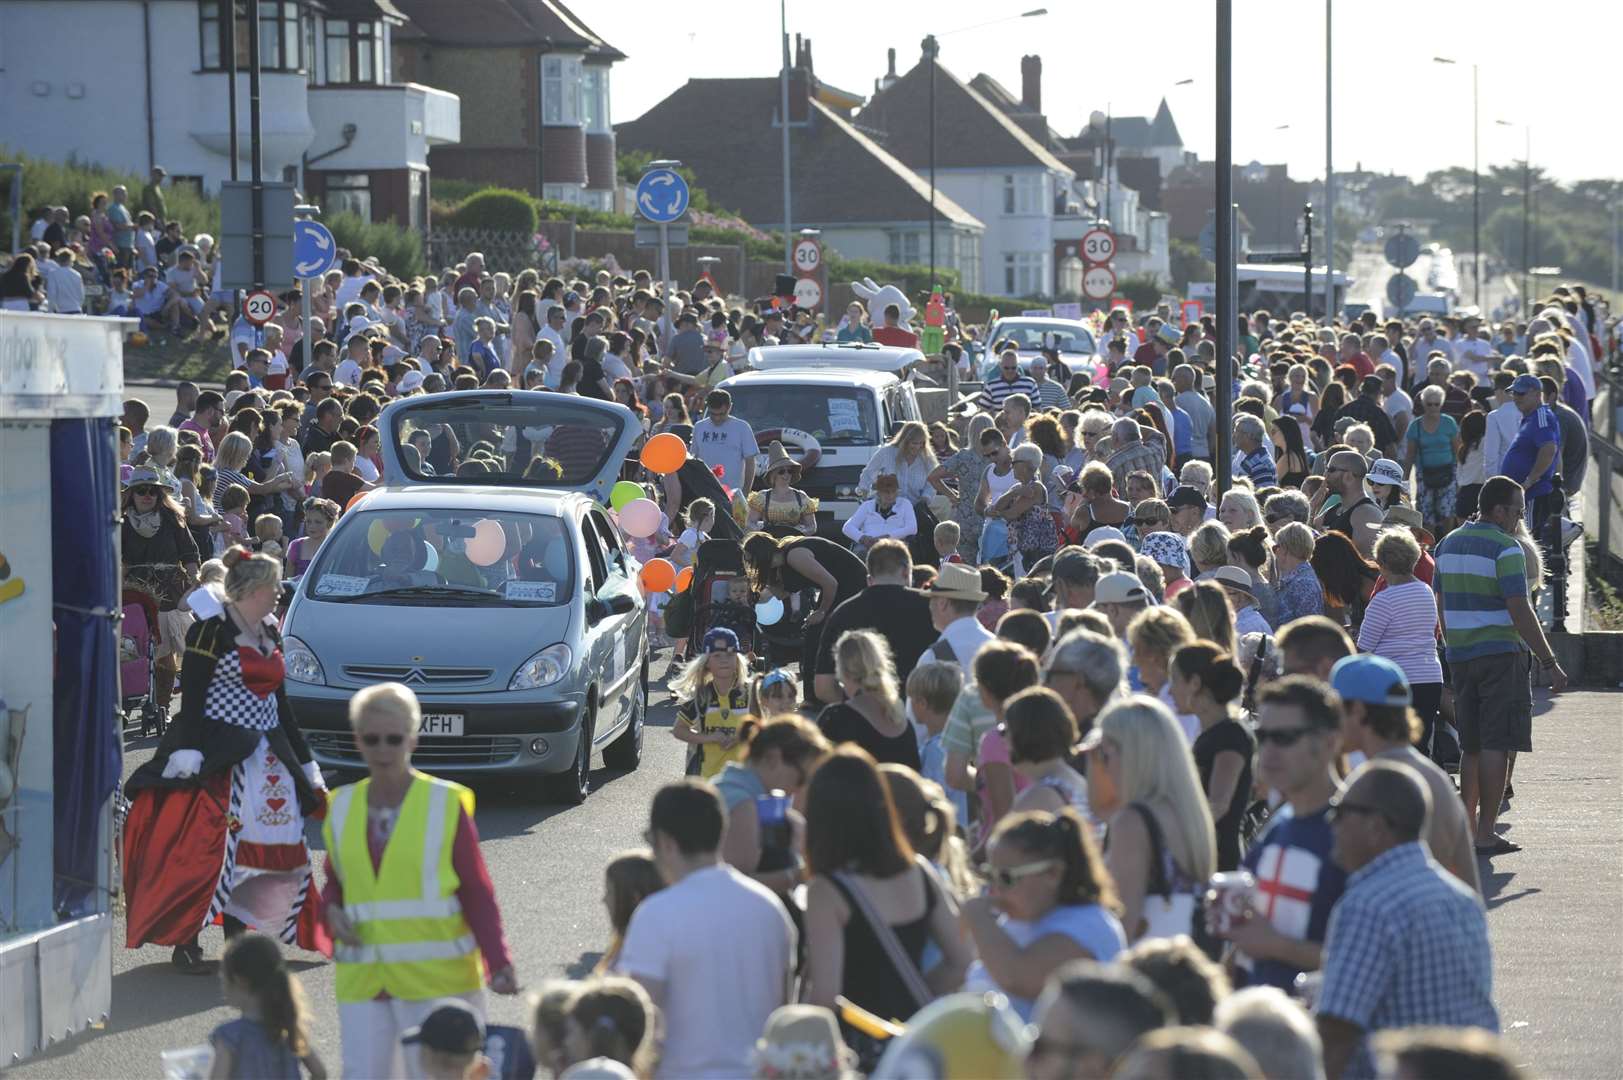 Herne Bay seafront during the Carnival in 2015